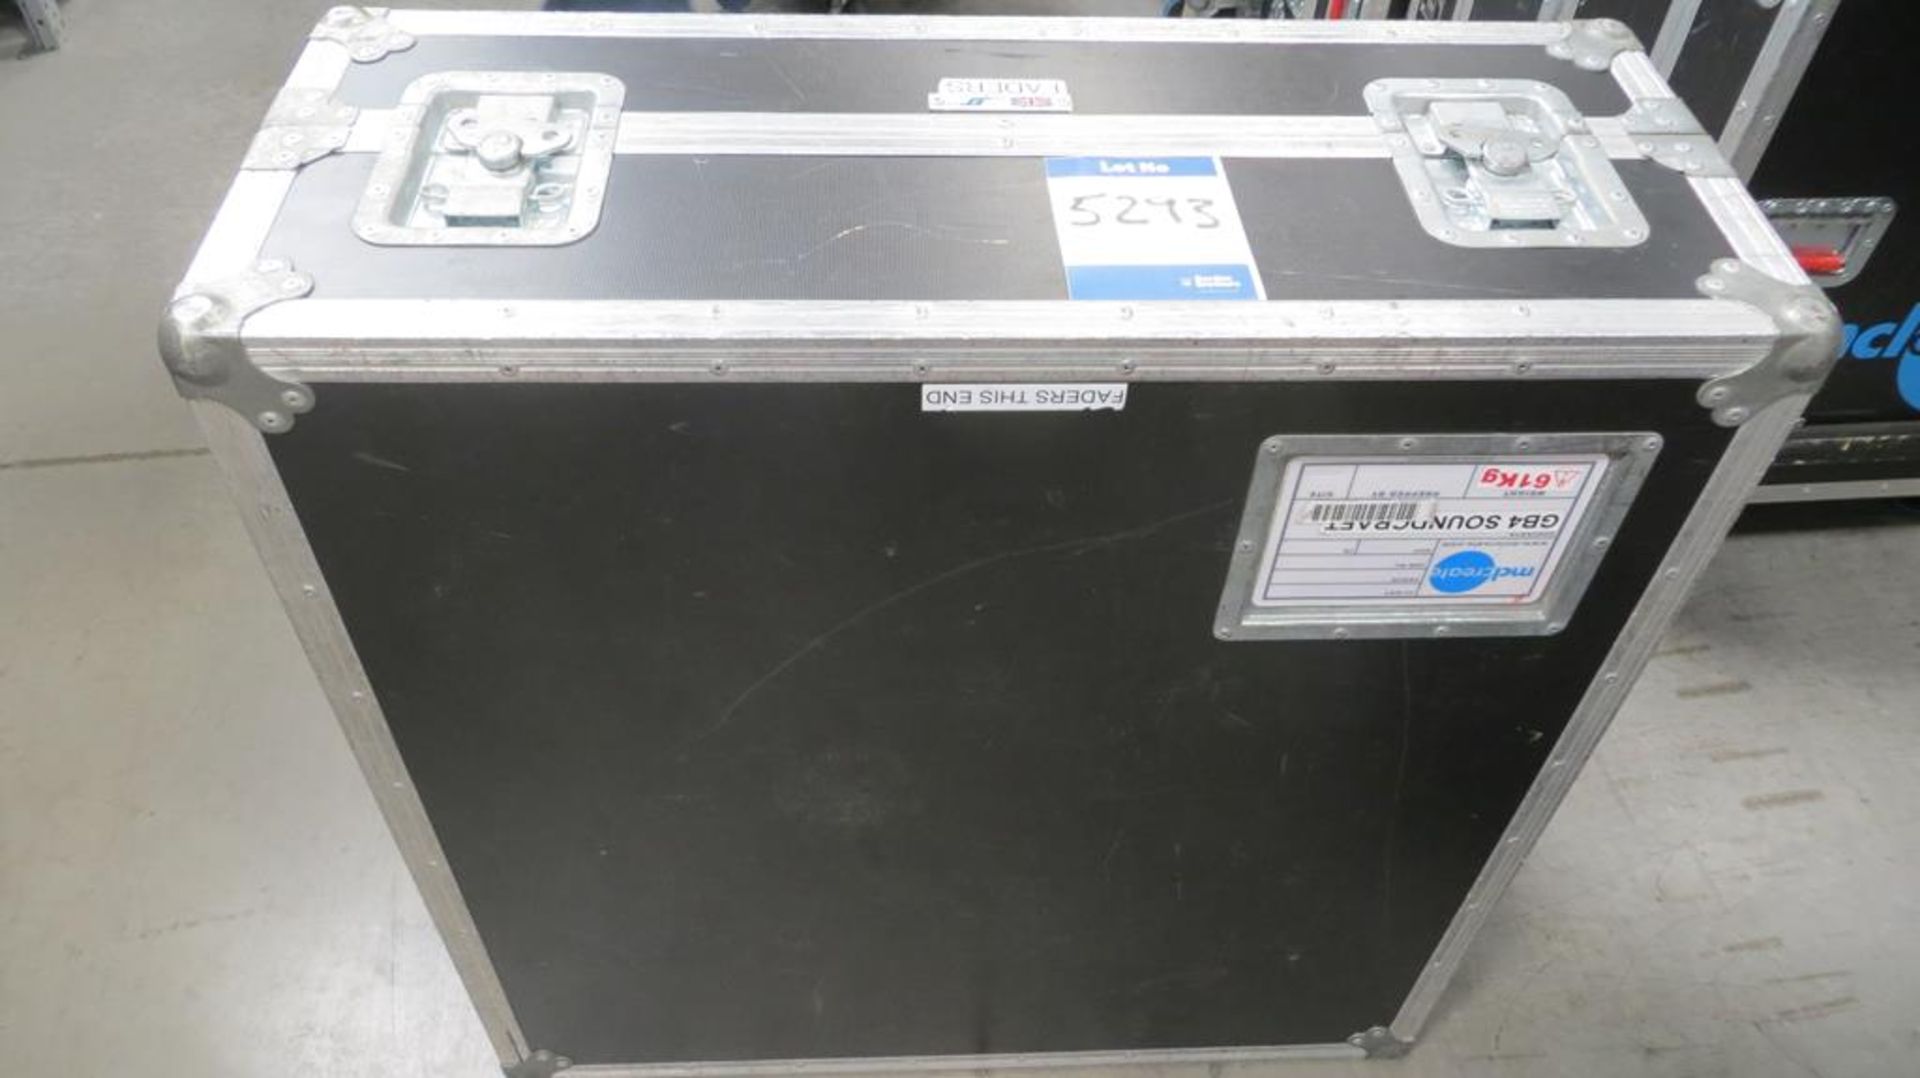 Soundcraft, analogue mixing desk in transit case, - Image 2 of 2